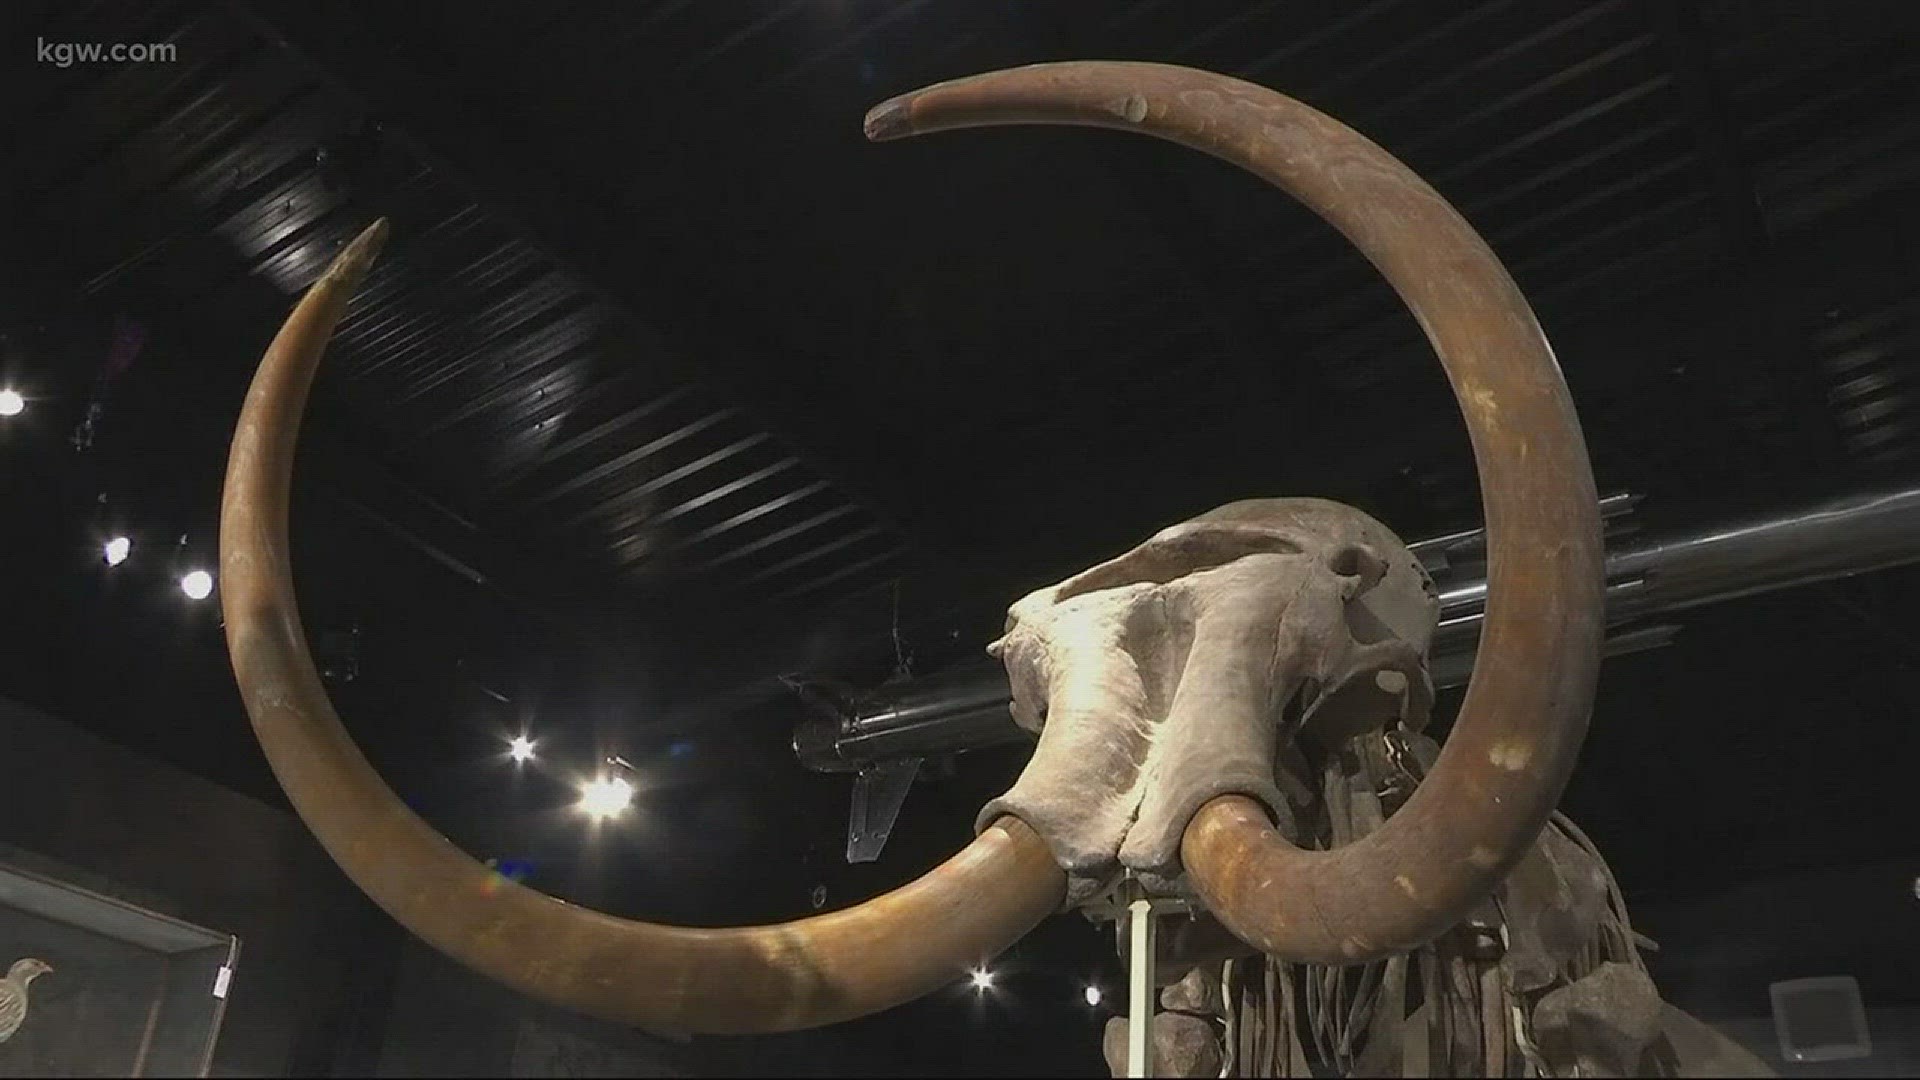 You can bid on a Woolly Mammoth family for $600k